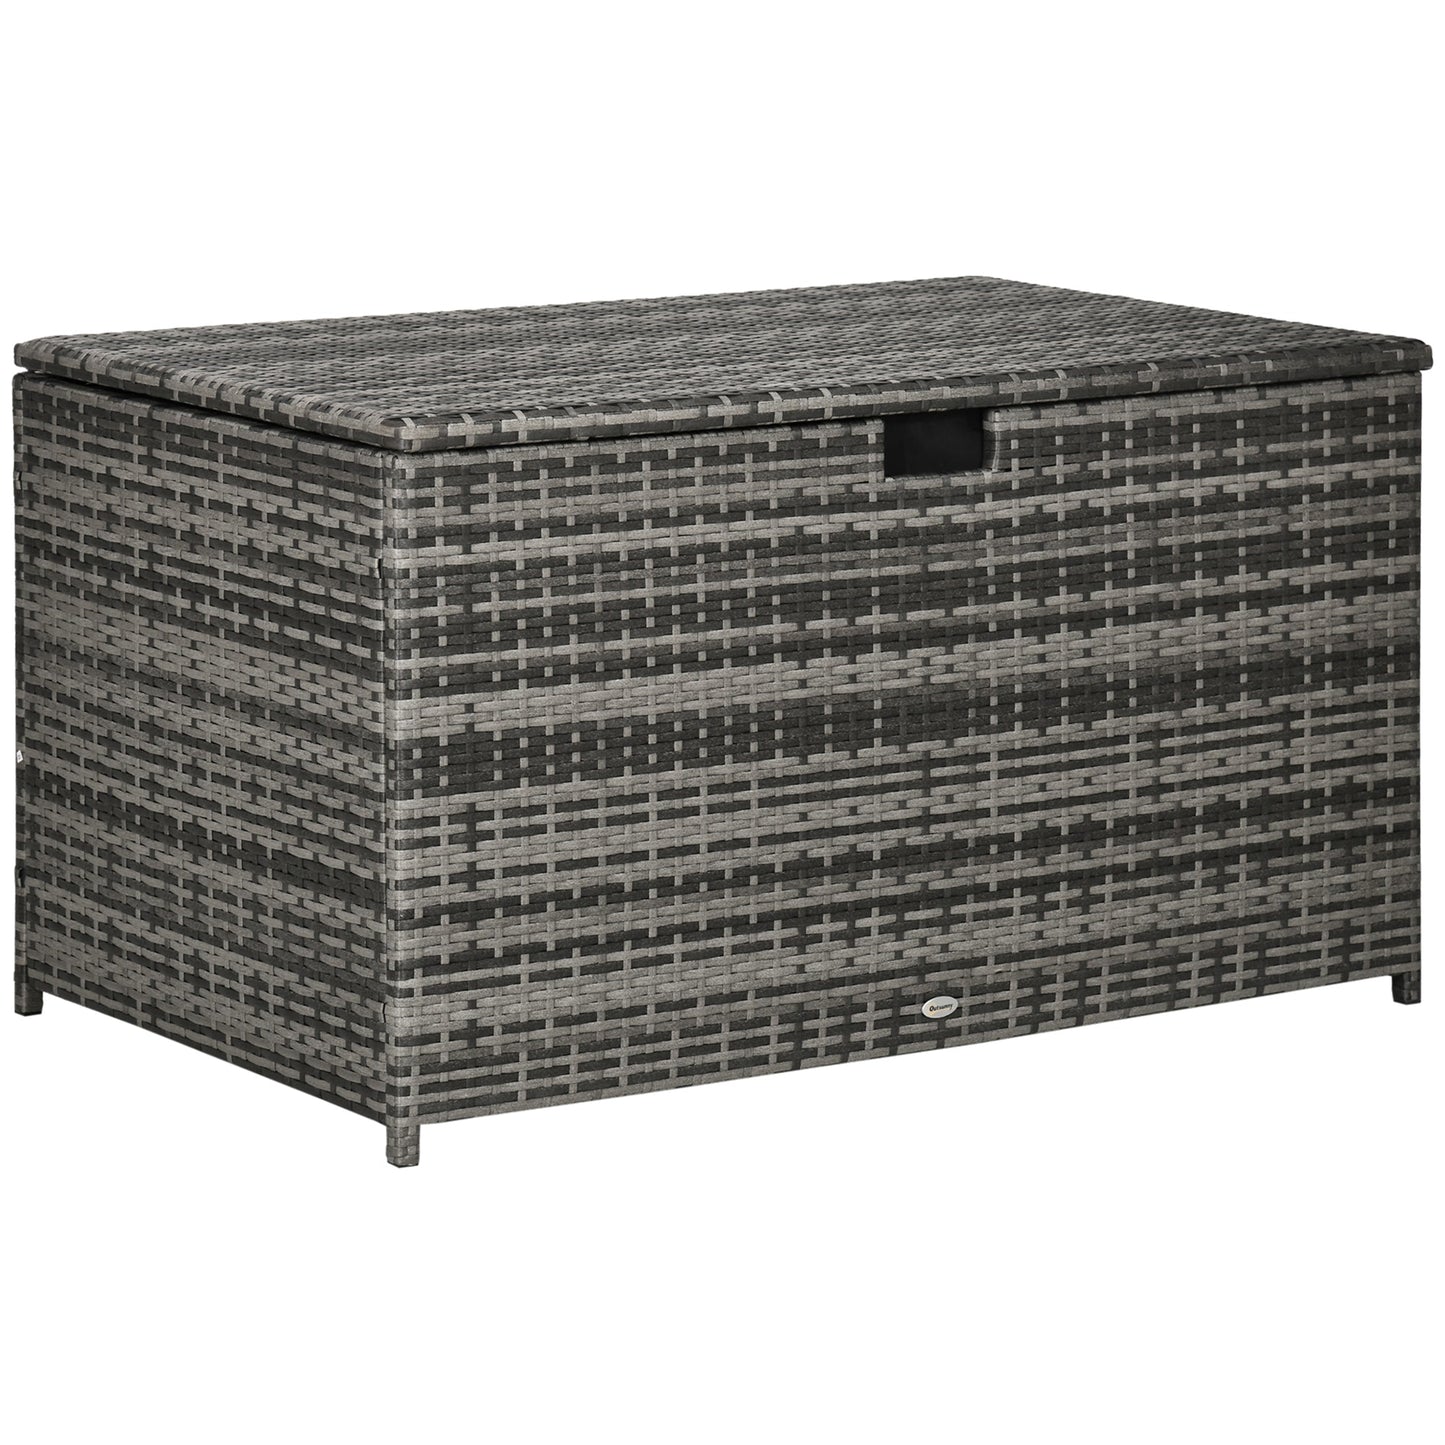 Outdoor and Garden-Outdoor Deck Box, PE Rattan Wicker with Liner, Hydraulic Lift & Handle for Indoor, Outdoor, Patio Furniture, Pool, Toys, Garden Tools, Gray - Outdoor Style Company